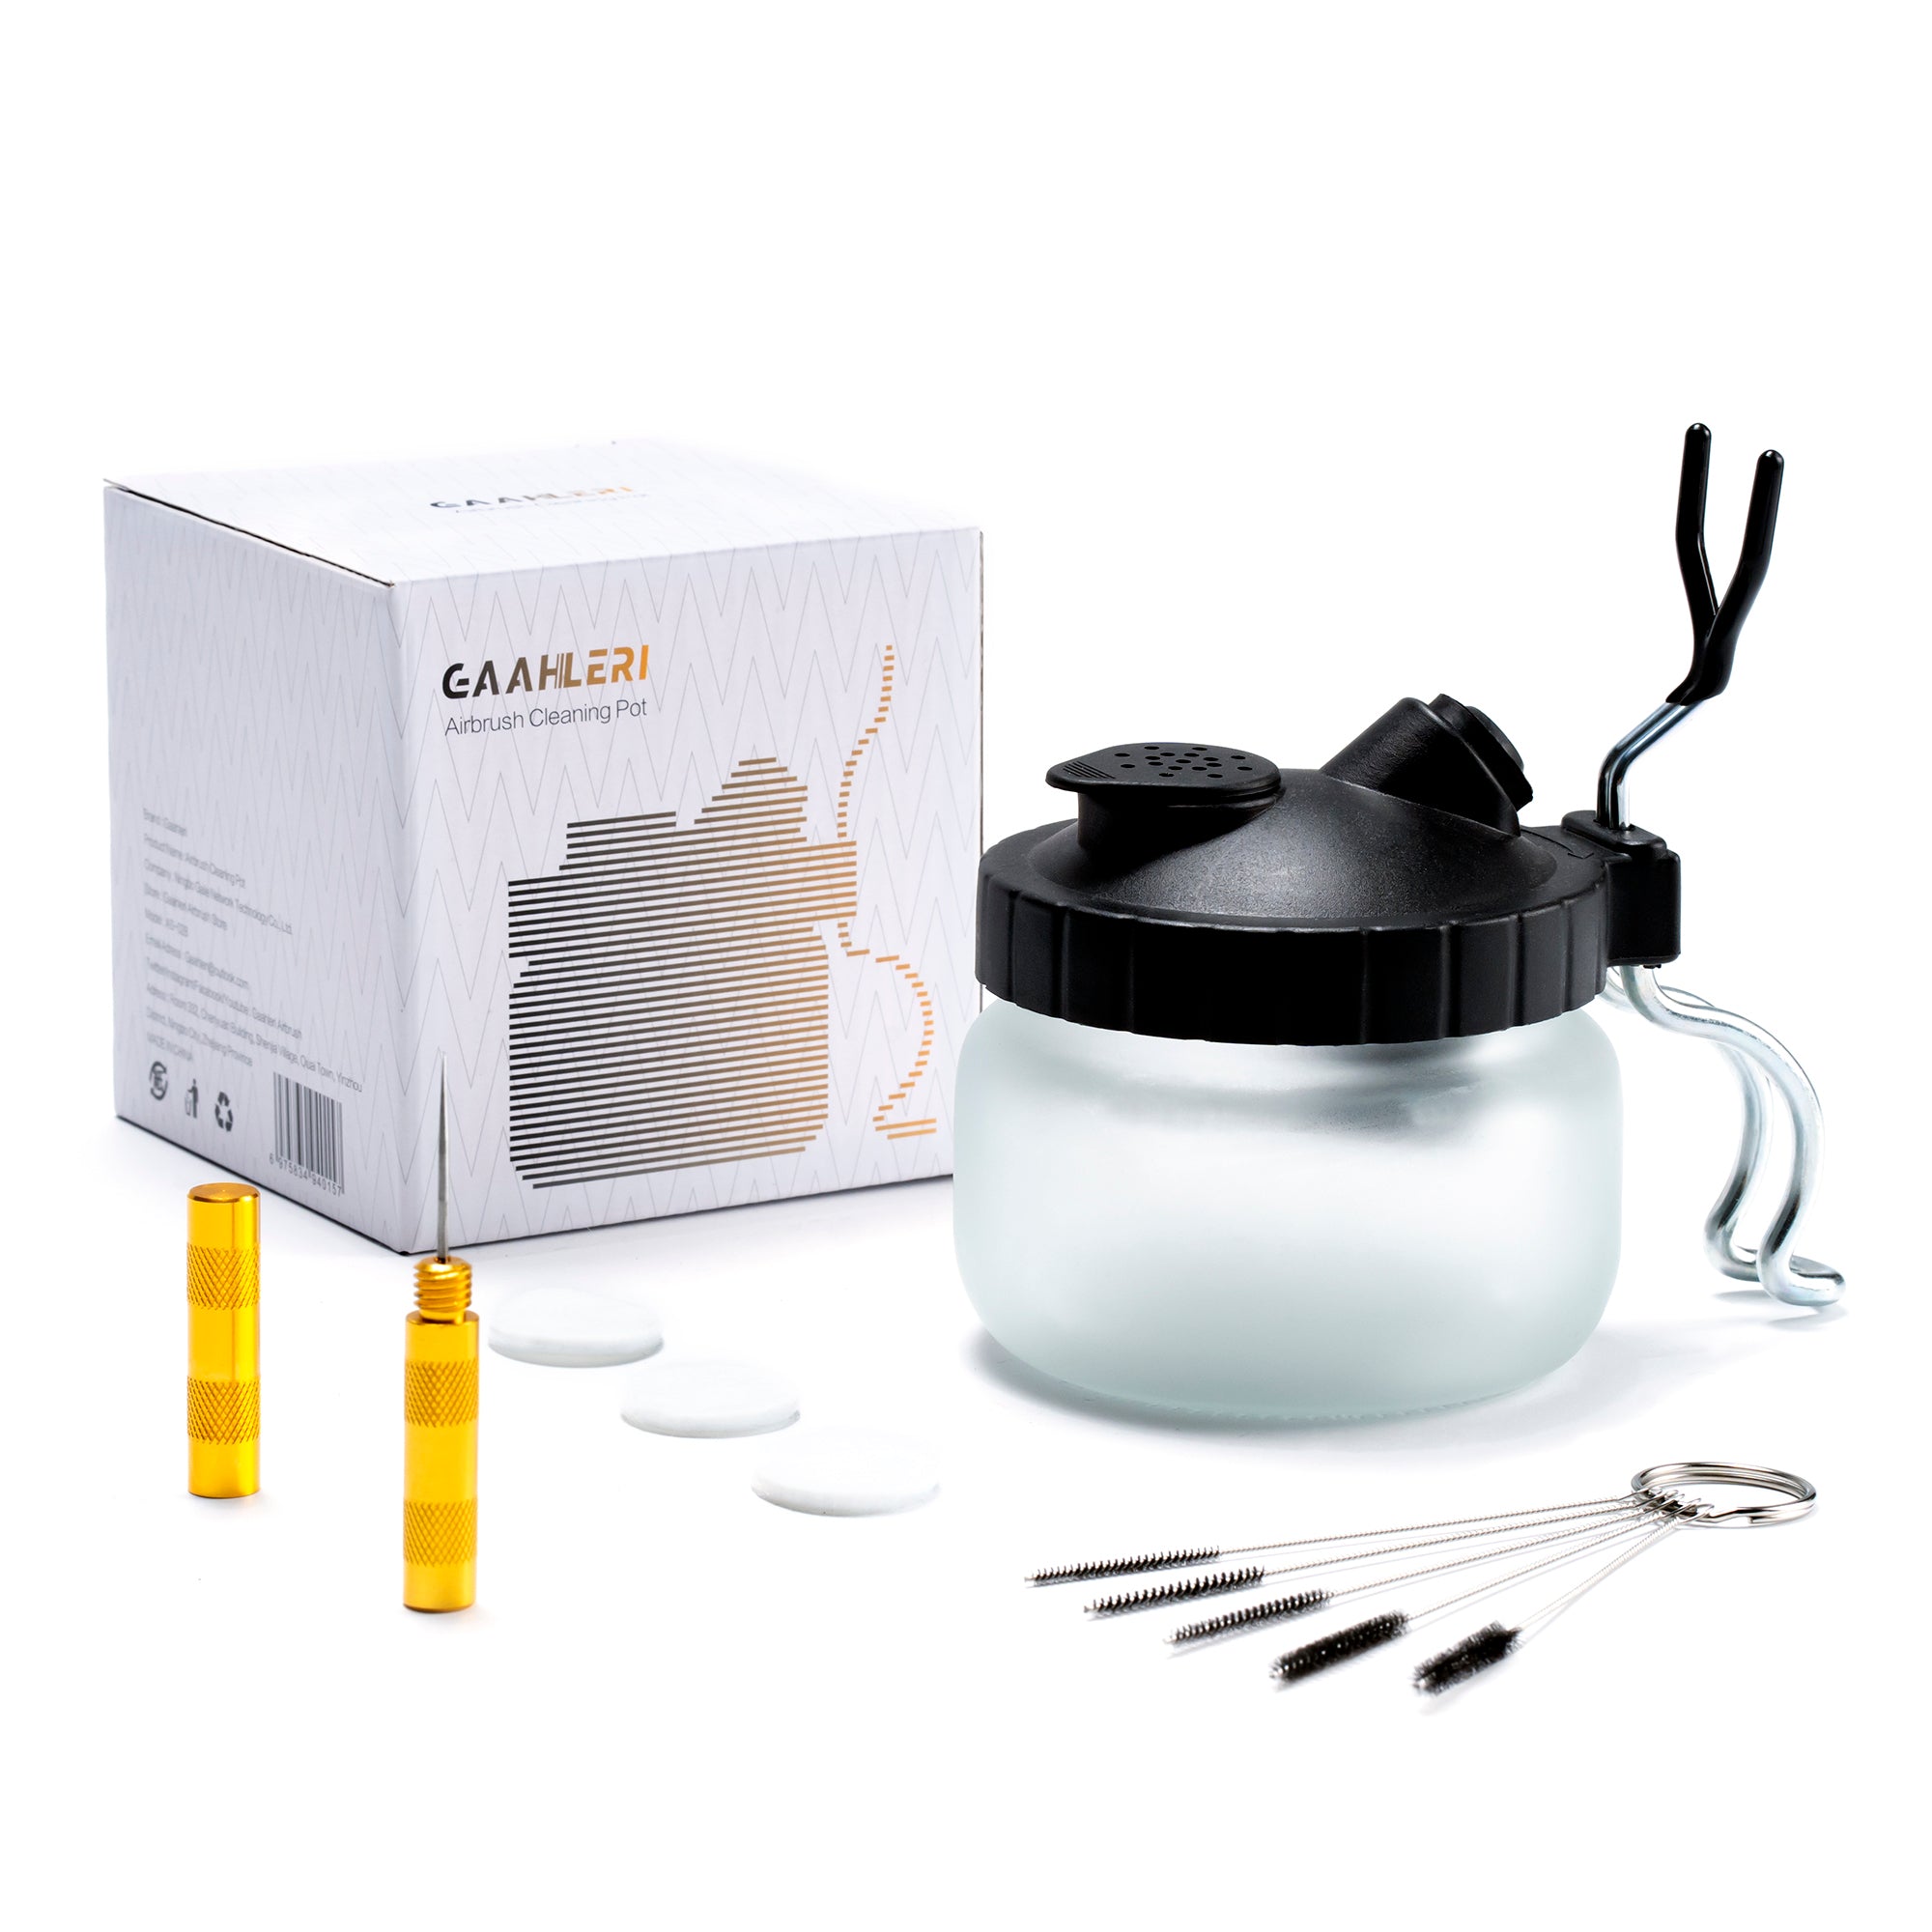 Airbrush 3-in-1 Cleaning Pot With Holder Airbrush Cleaning Kit